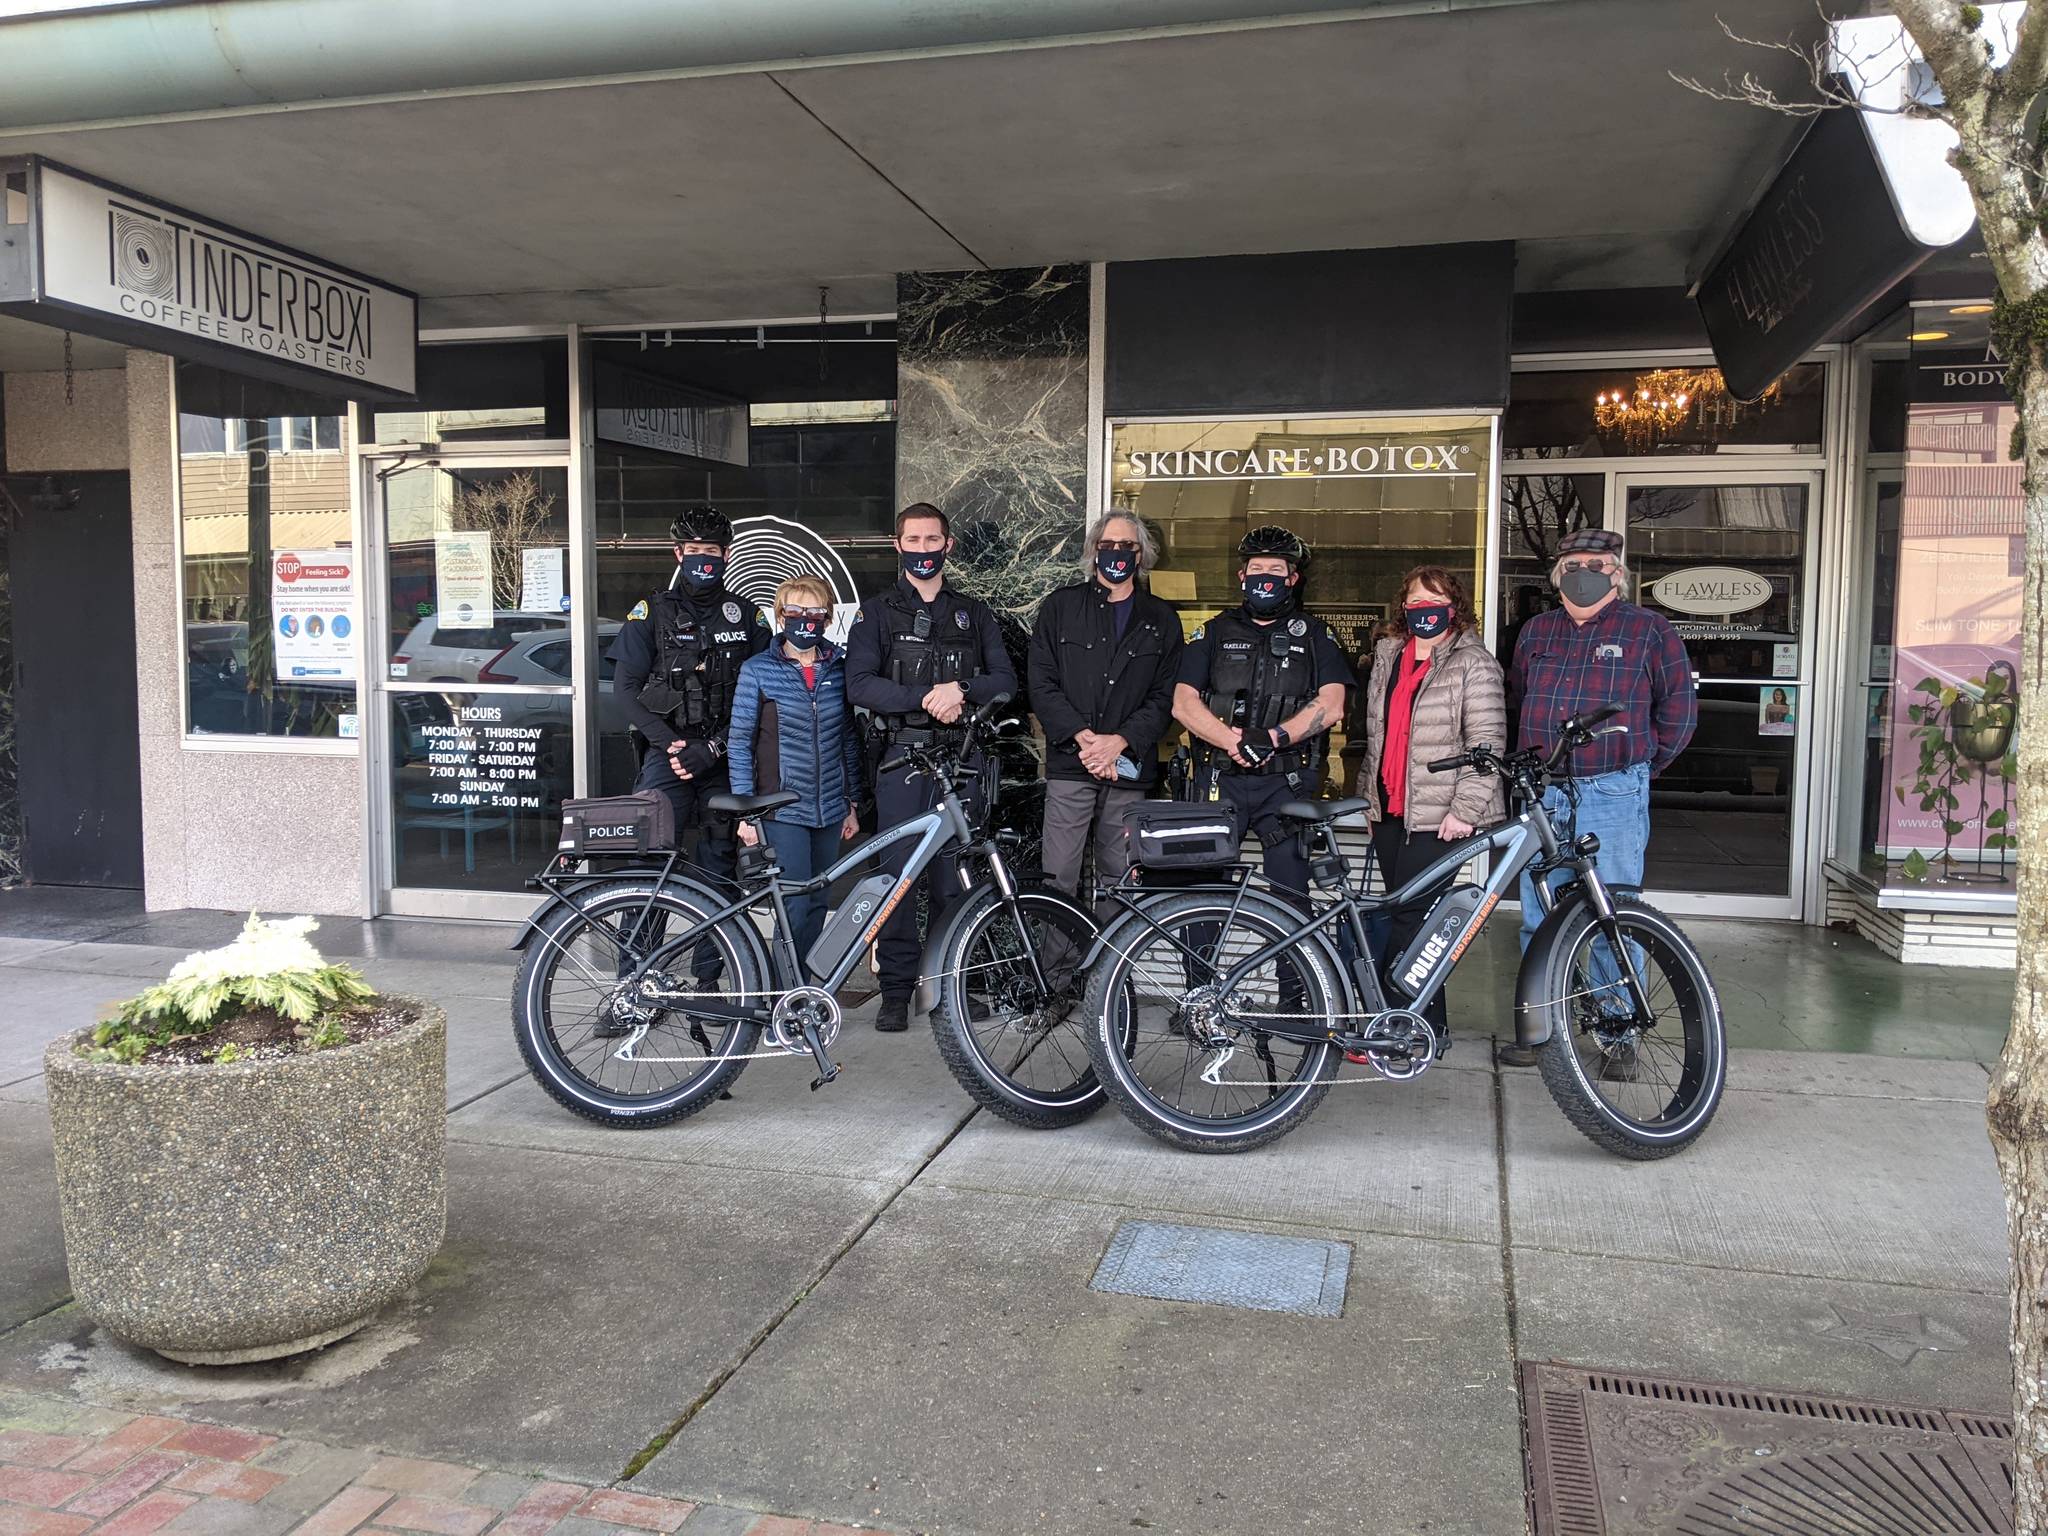 Dave Haviland photo
Board members from the Downtown Aberdeen Association got together with members of the Bike Patrol from the Aberdeen Police Department Tuesday to mark the downtown business community’s donation of e-bikes to the city. Left to right are: officer Kyle Hoffman, Bette Worth, officer Dillon Mitchell, Wil Russoul, Officer George Kelley, Cathy Williams and Alan Richrod